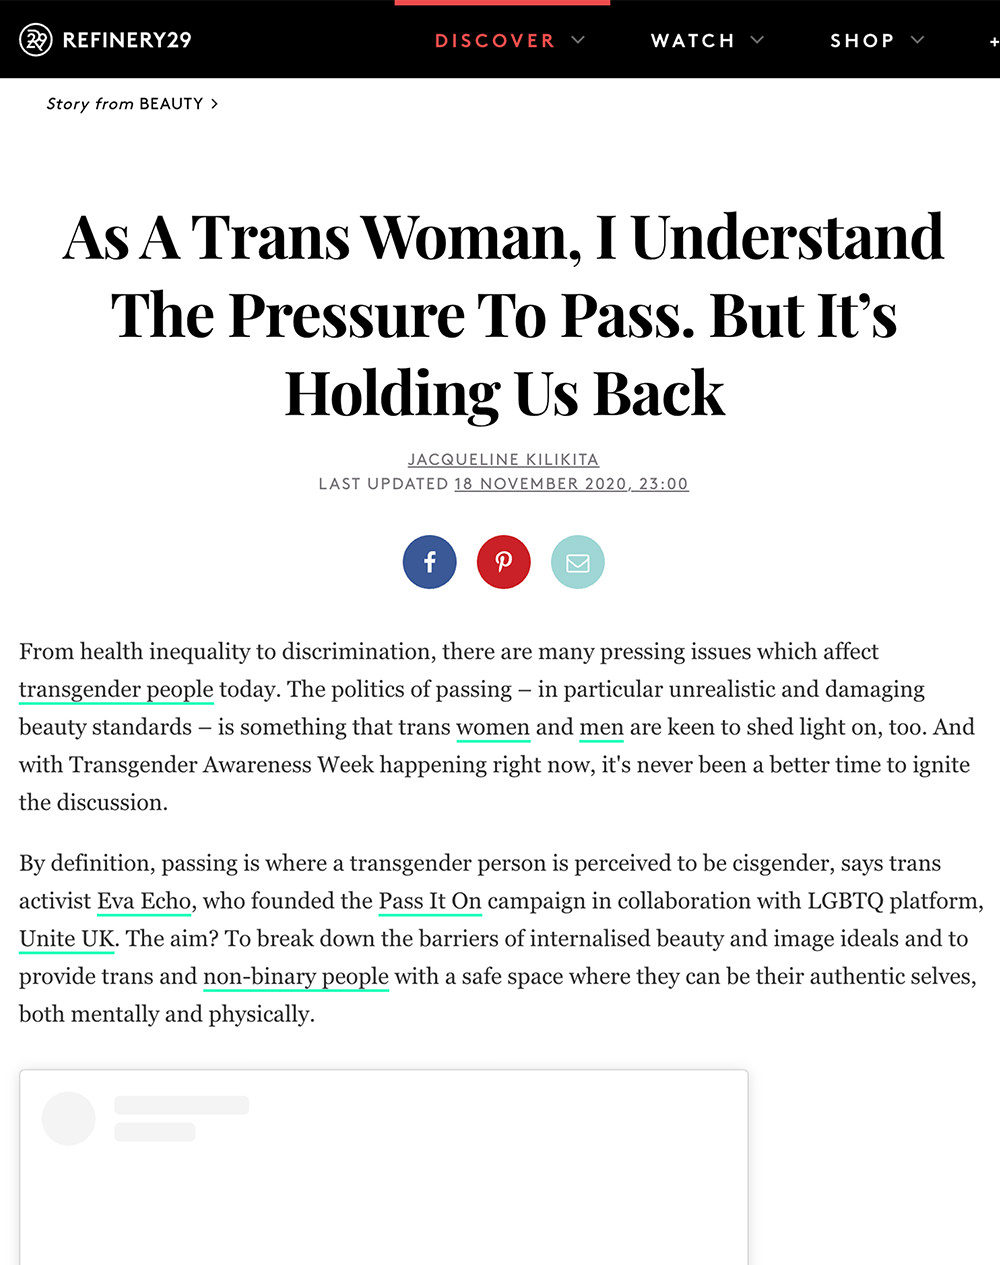 The London Transgender Clinic In The Press